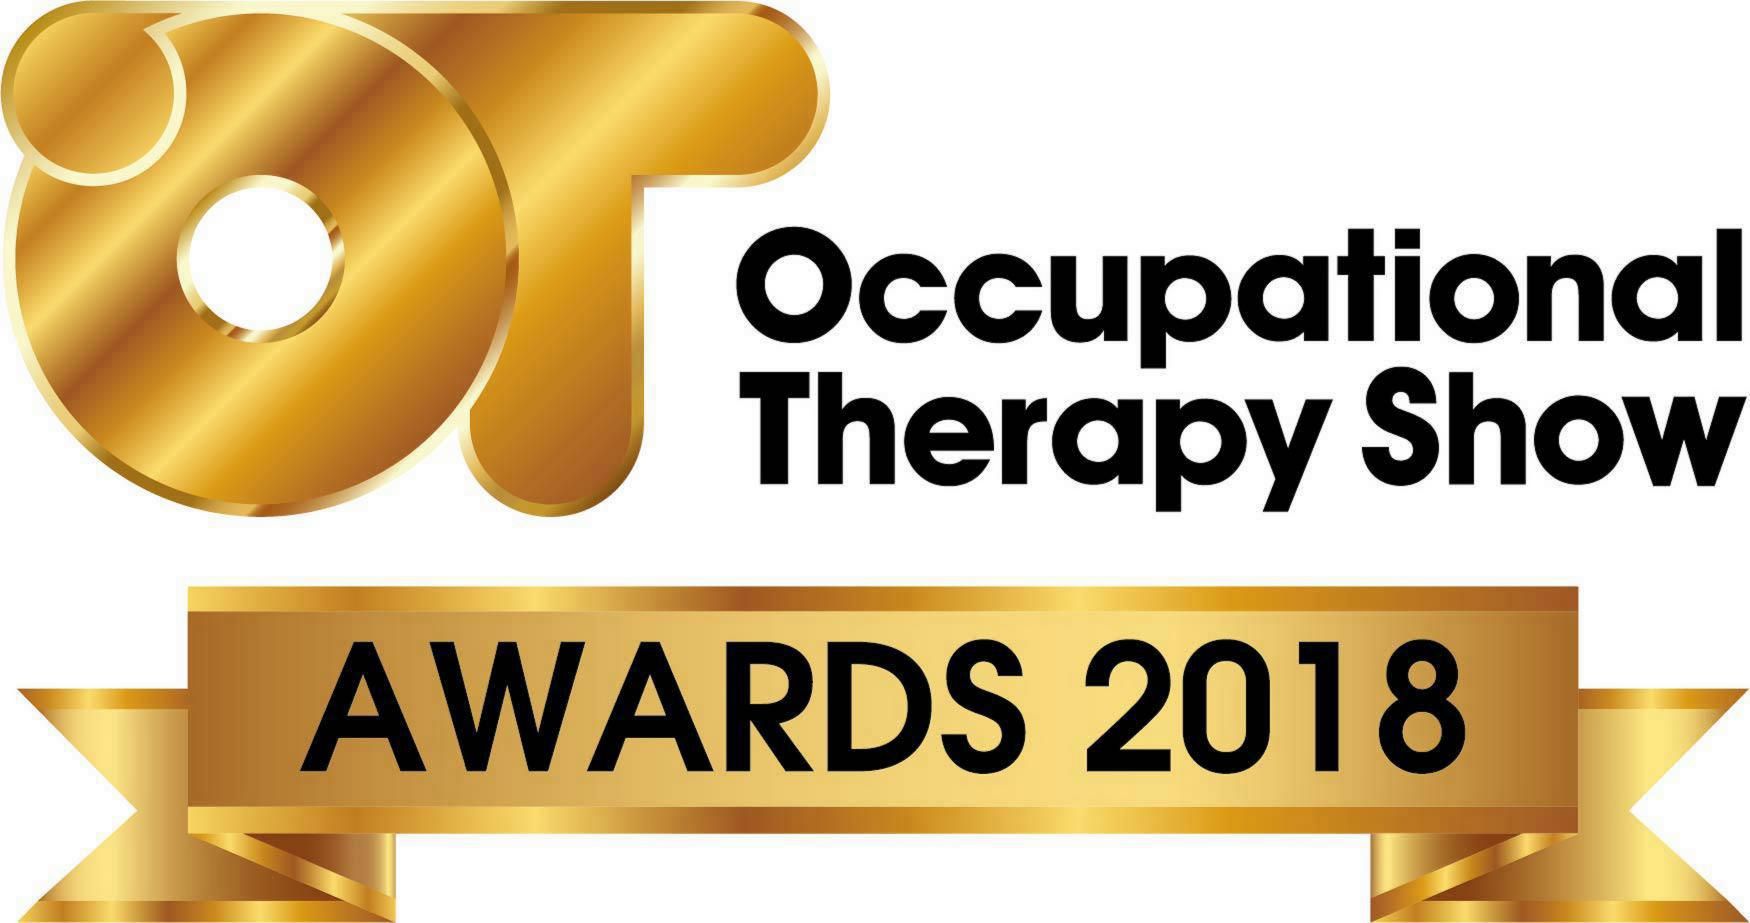 The Occupational Therapy Show Awards are now open for nominations!